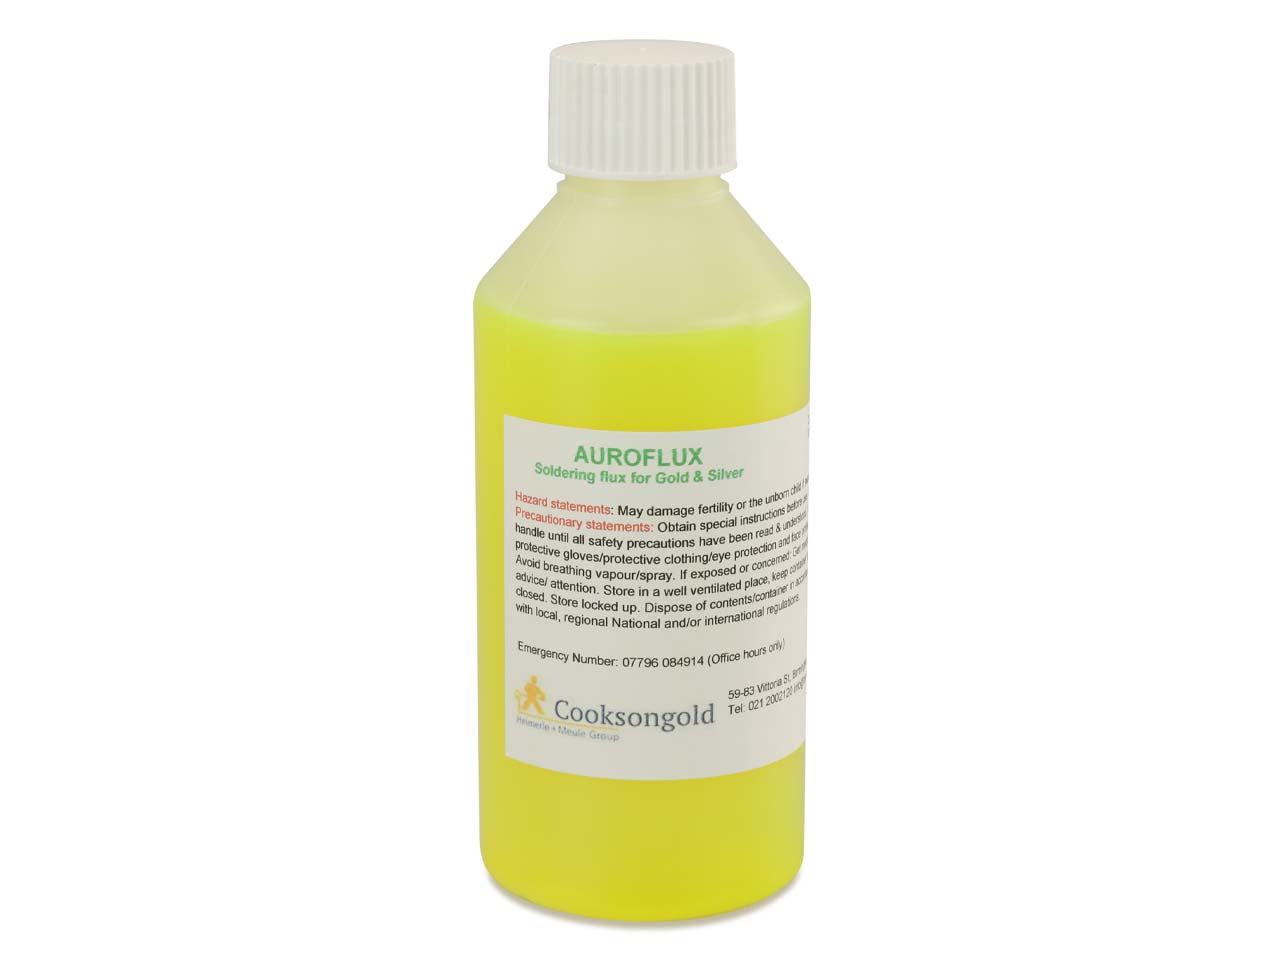 Do you have a safety data sheet for Auroflux Soldering Fluid 250ml?